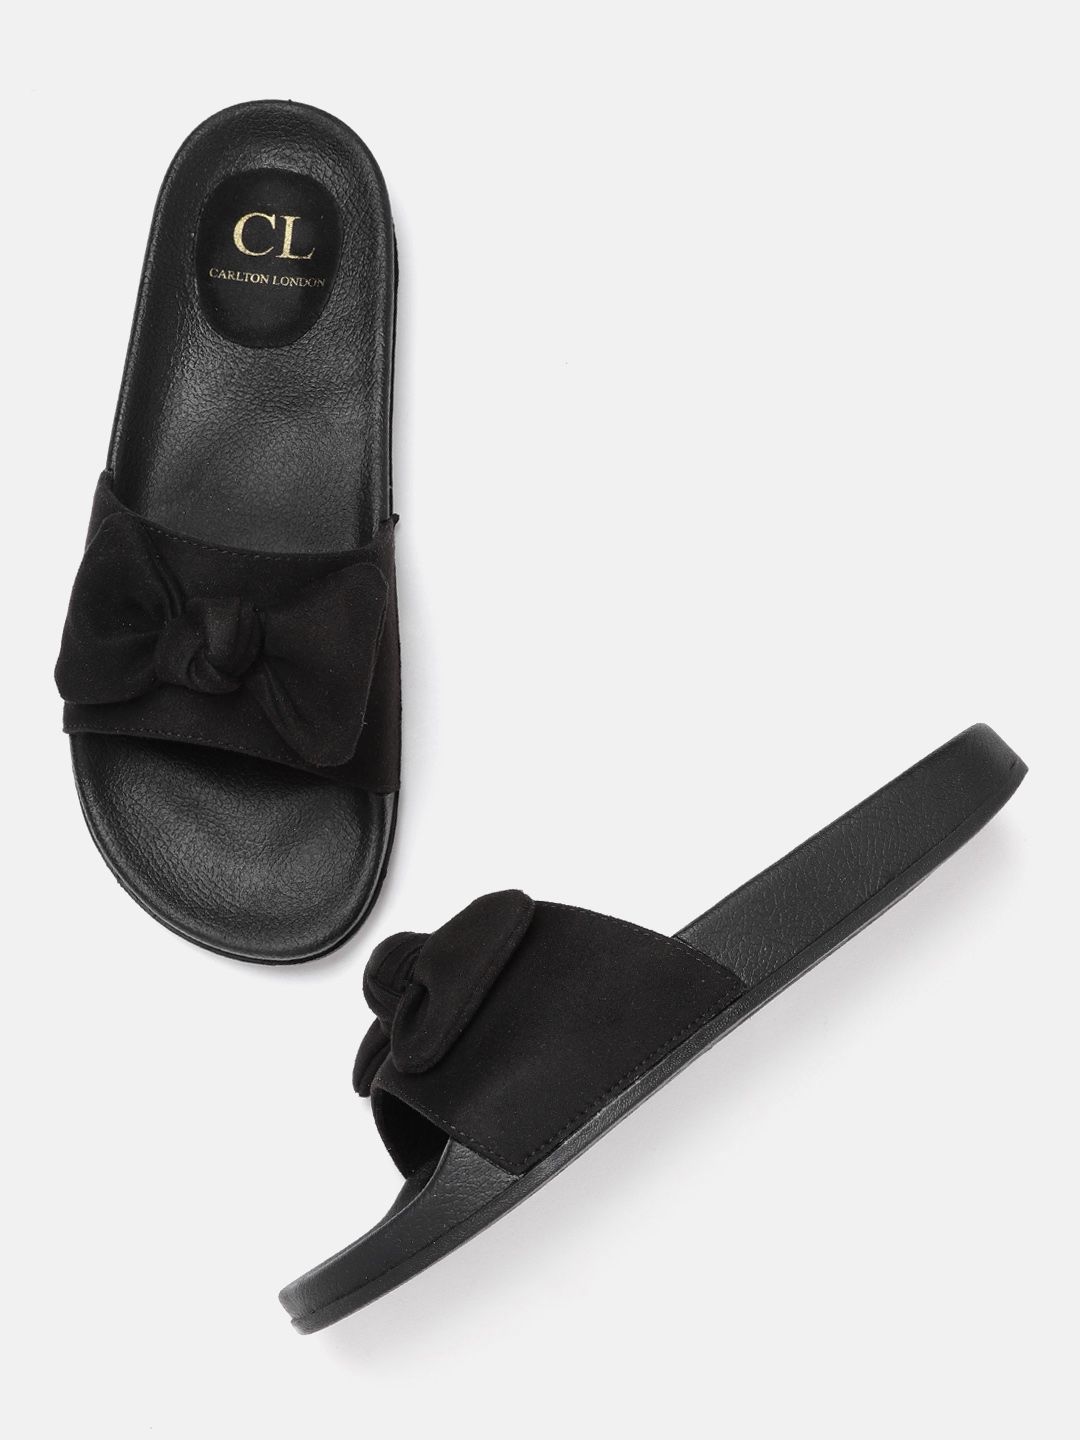 Carlton London Women Black Open Toe Flats with Bows Price in India